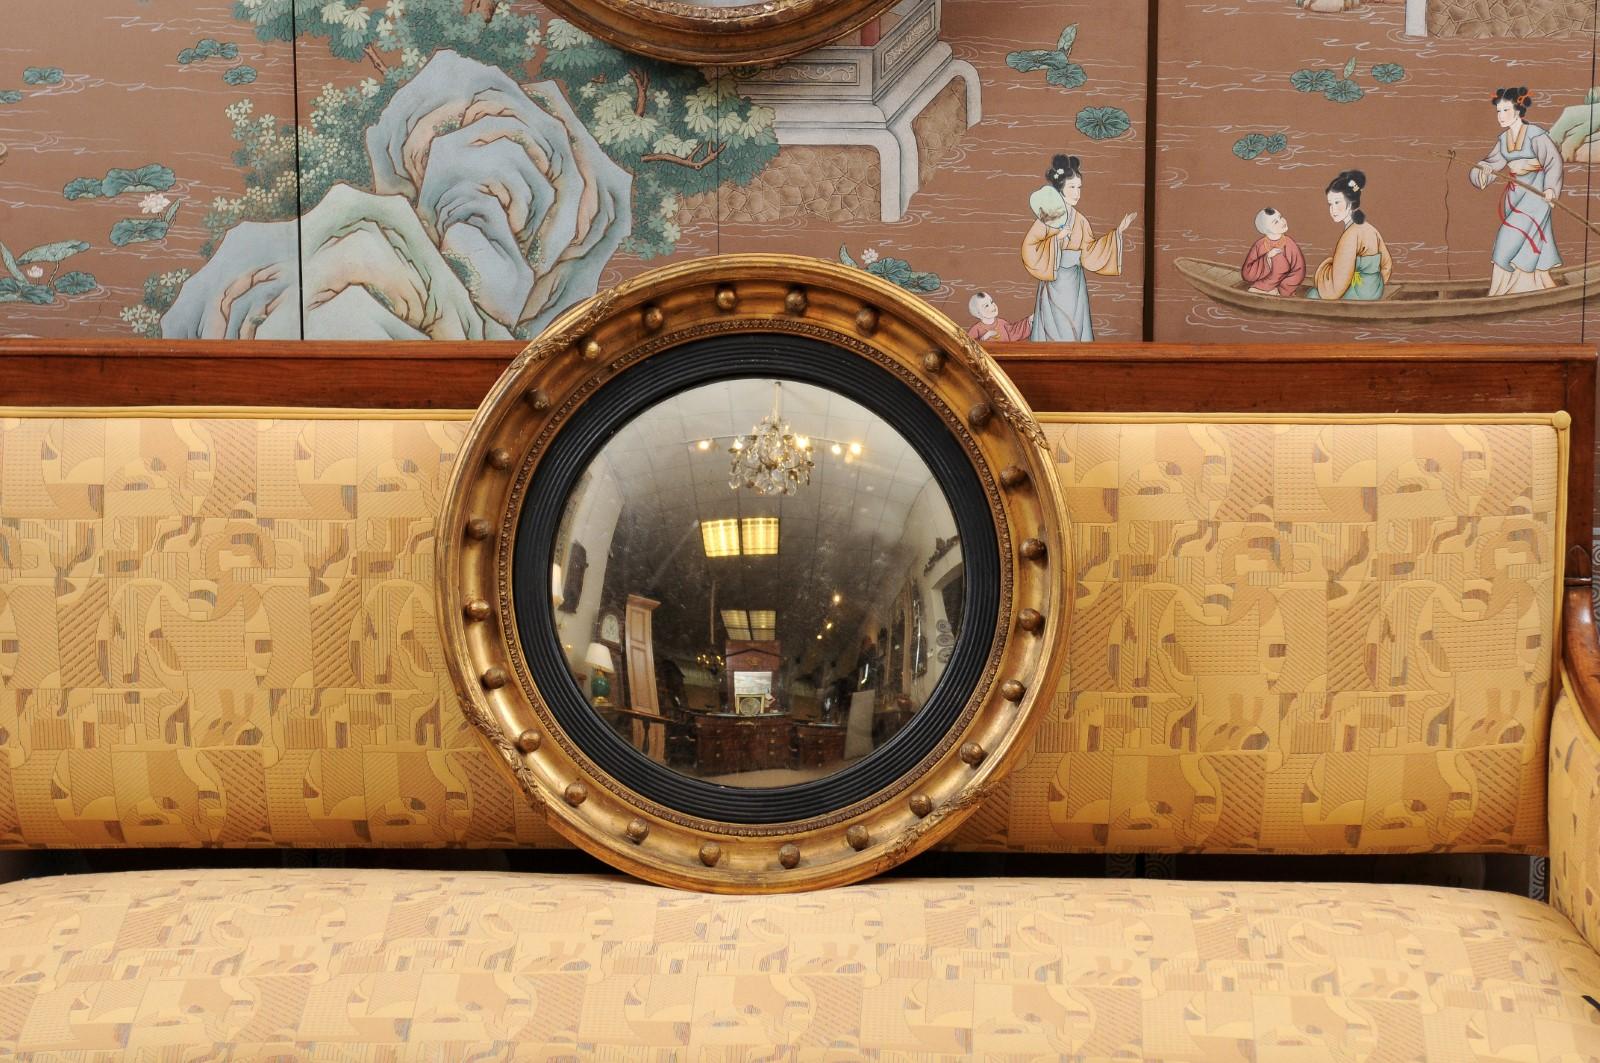 A 19th century English giltwood bull’s-eye mirror with convex glass, ebonized and round balls detail.